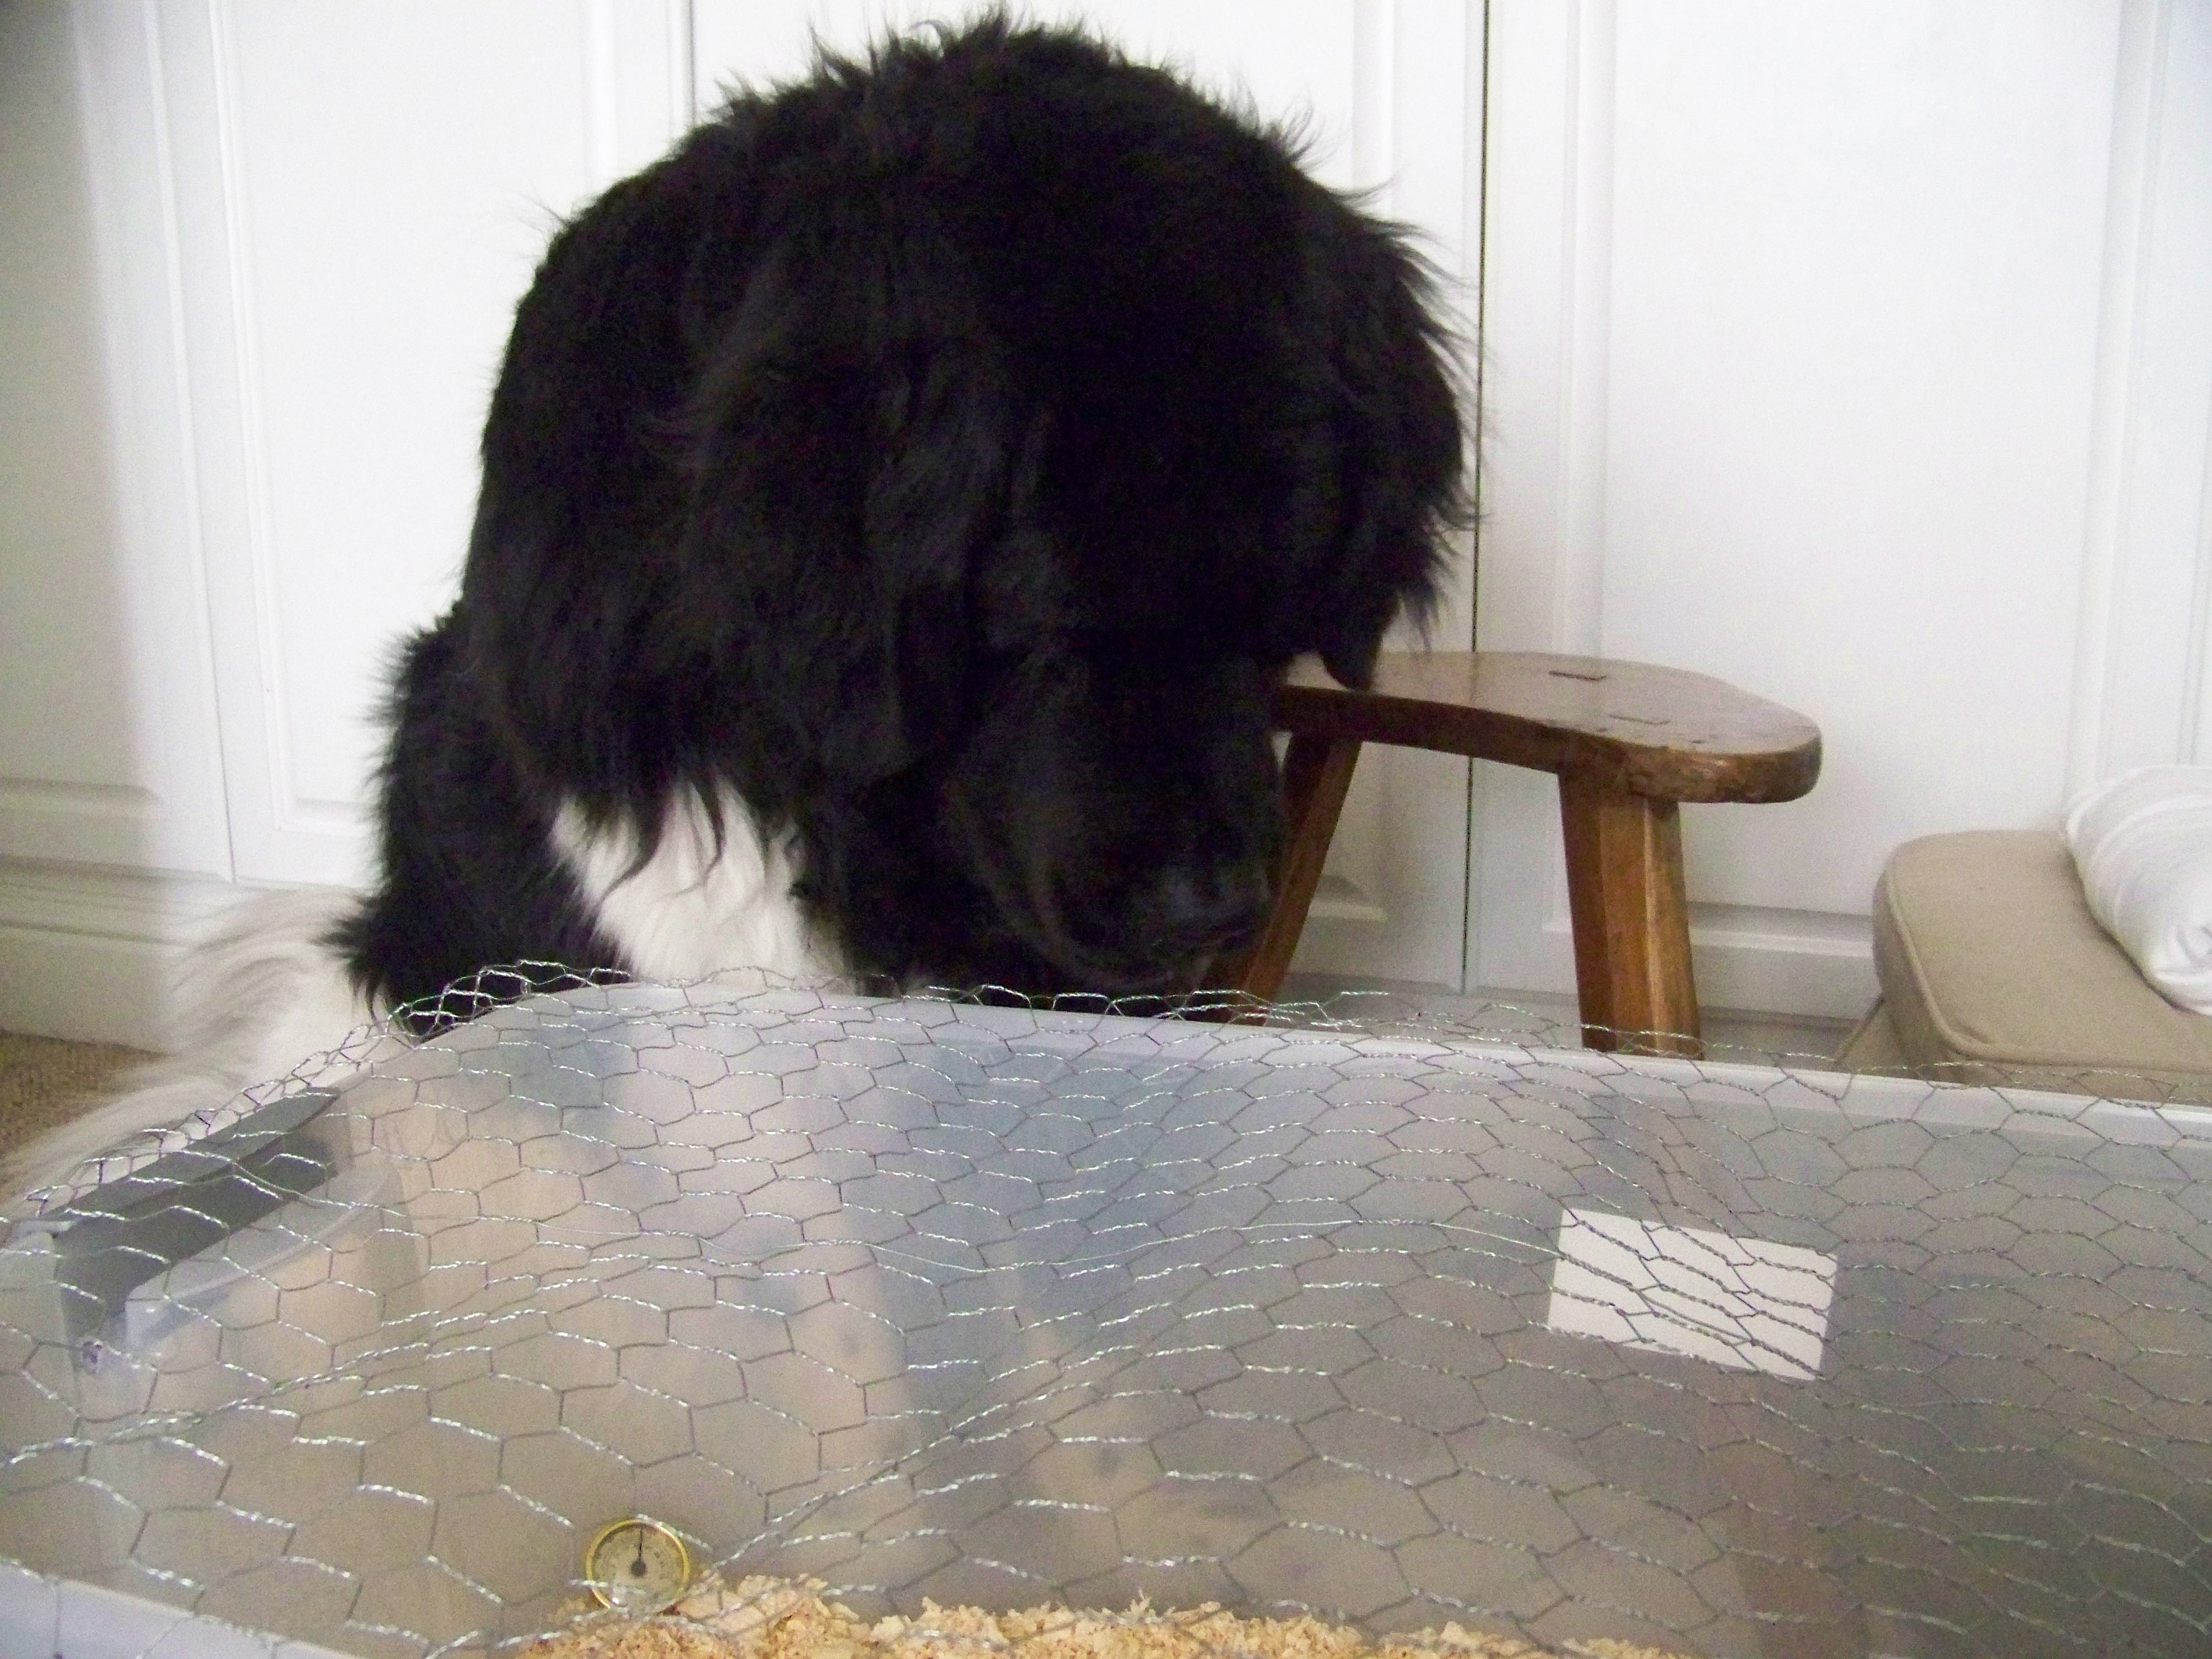 Our Newfoundland loved watching "chicken TV" when the girls were in the brooder box.  We didn't know how she would be towards chickens since she is a cat chaser.  Turns out she loves them.  She chased the cat away from them when they were small.  They walk on her and groom her and she taught Penny (the chicken) how to chase the cat!